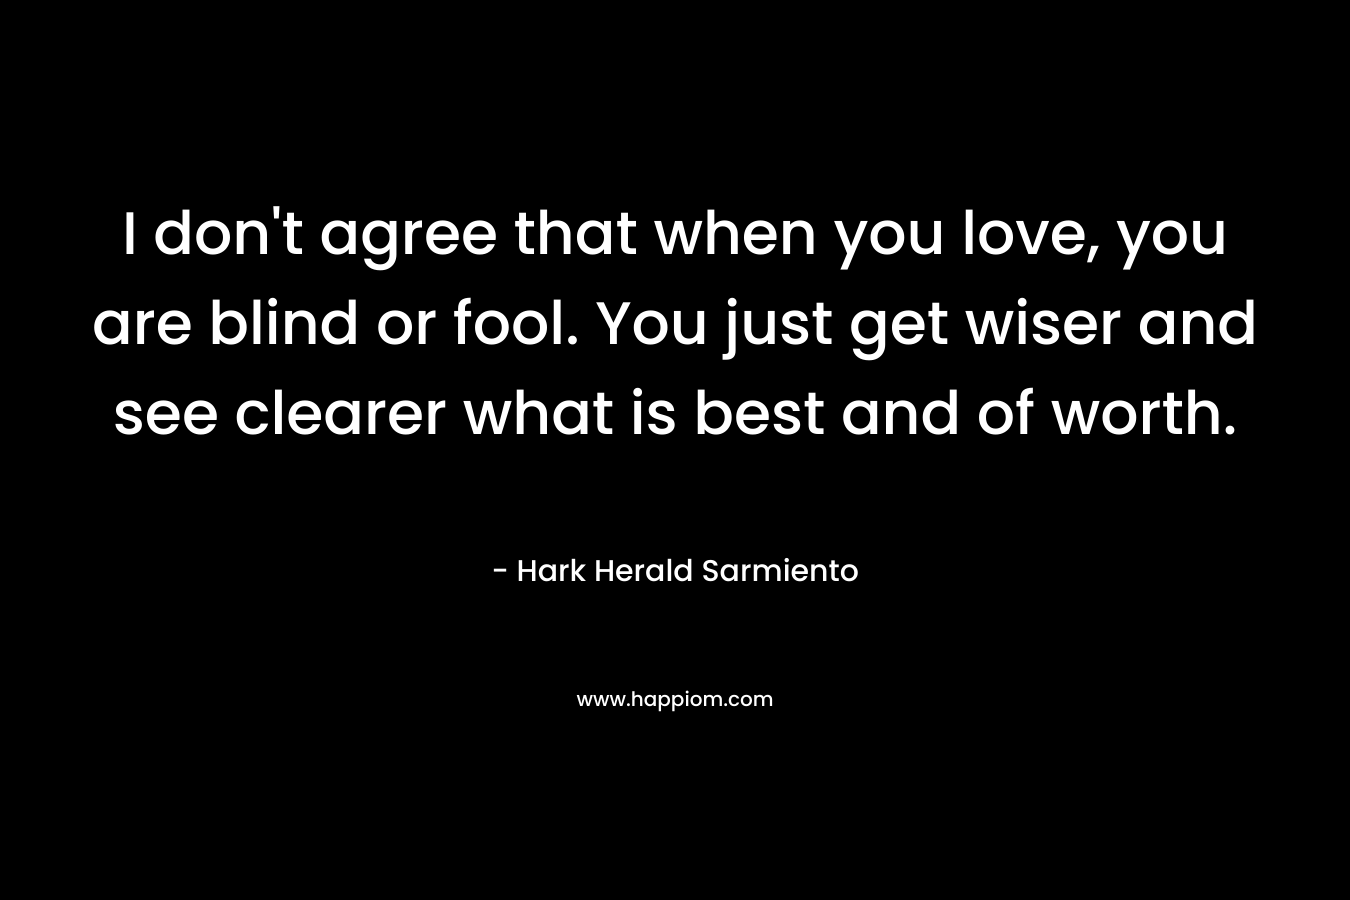 I don’t agree that when you love, you are blind or fool. You just get wiser and see clearer what is best and of worth. – Hark Herald Sarmiento